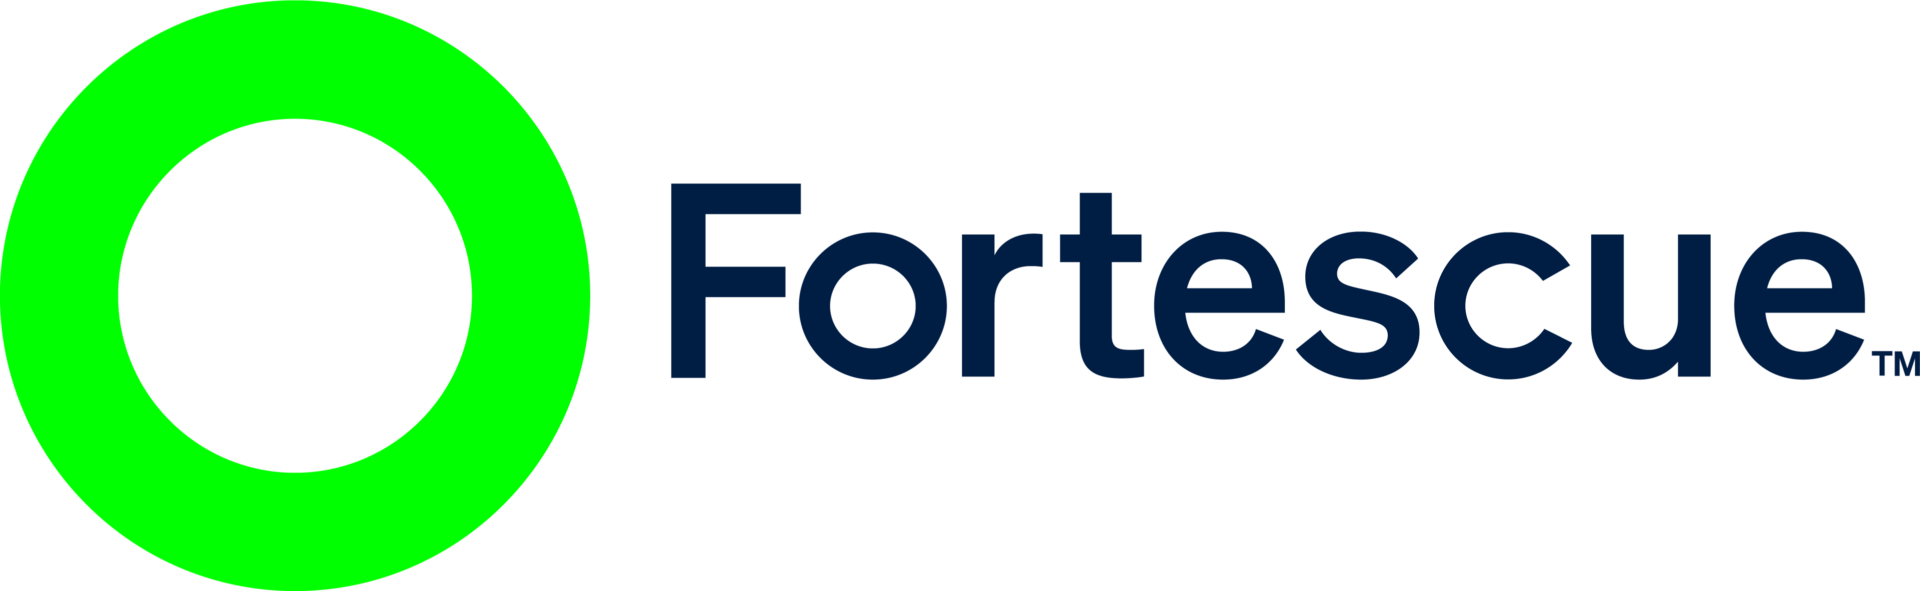 Fortescue Metals Group Logo